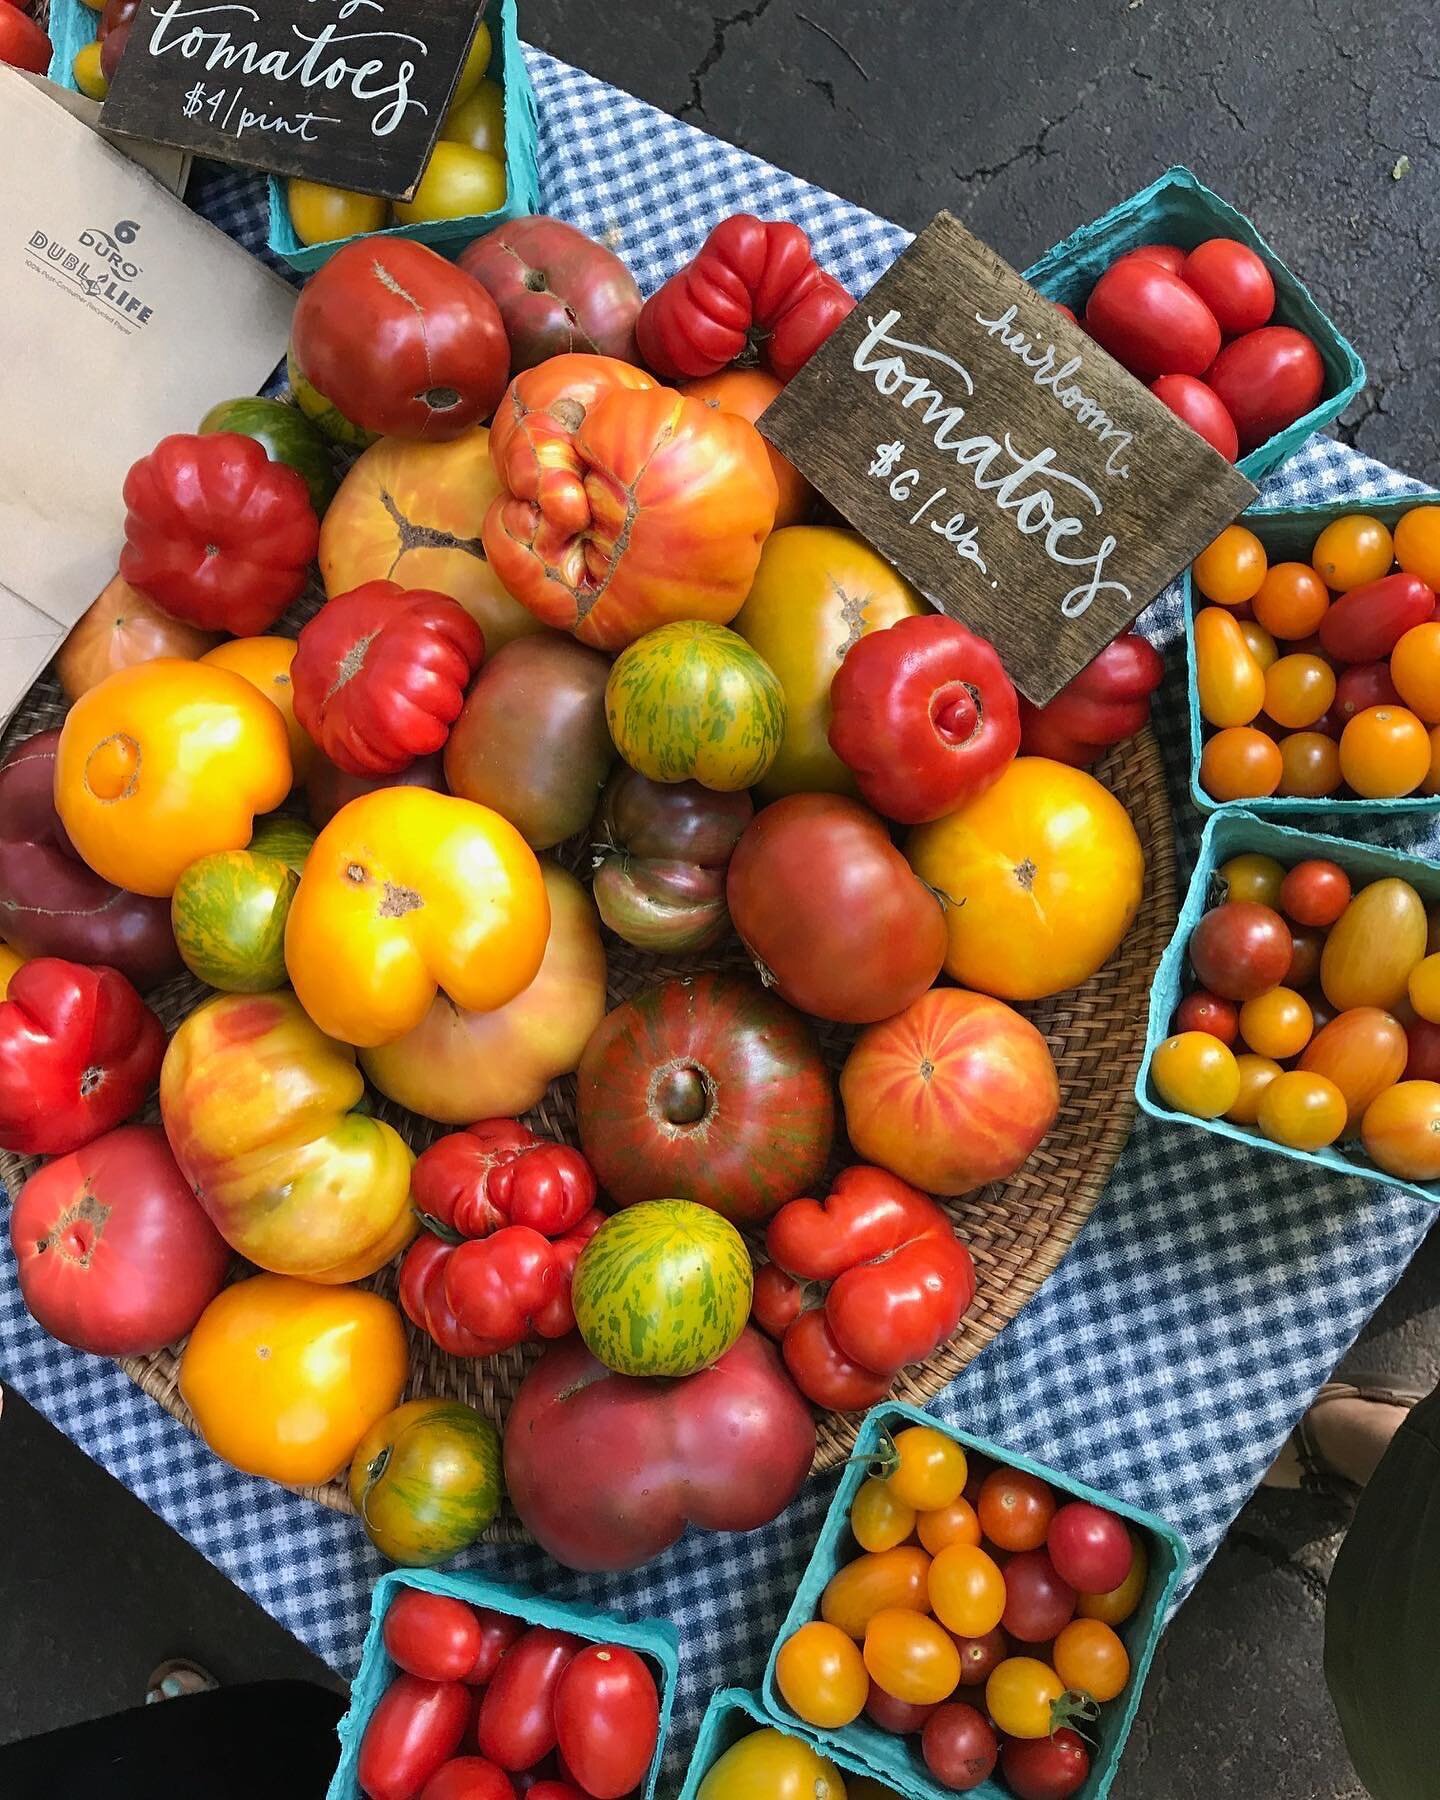 Farmers Market Season is springing forward into full bloom!
Shop Freedom Farmers Market Every Saturday 8:30am-Noon!
April 22nd is loaded with the goods, beautiful weather and the first of the hot house tomatoes! 
 
See who&rsquo;s at market this Satu